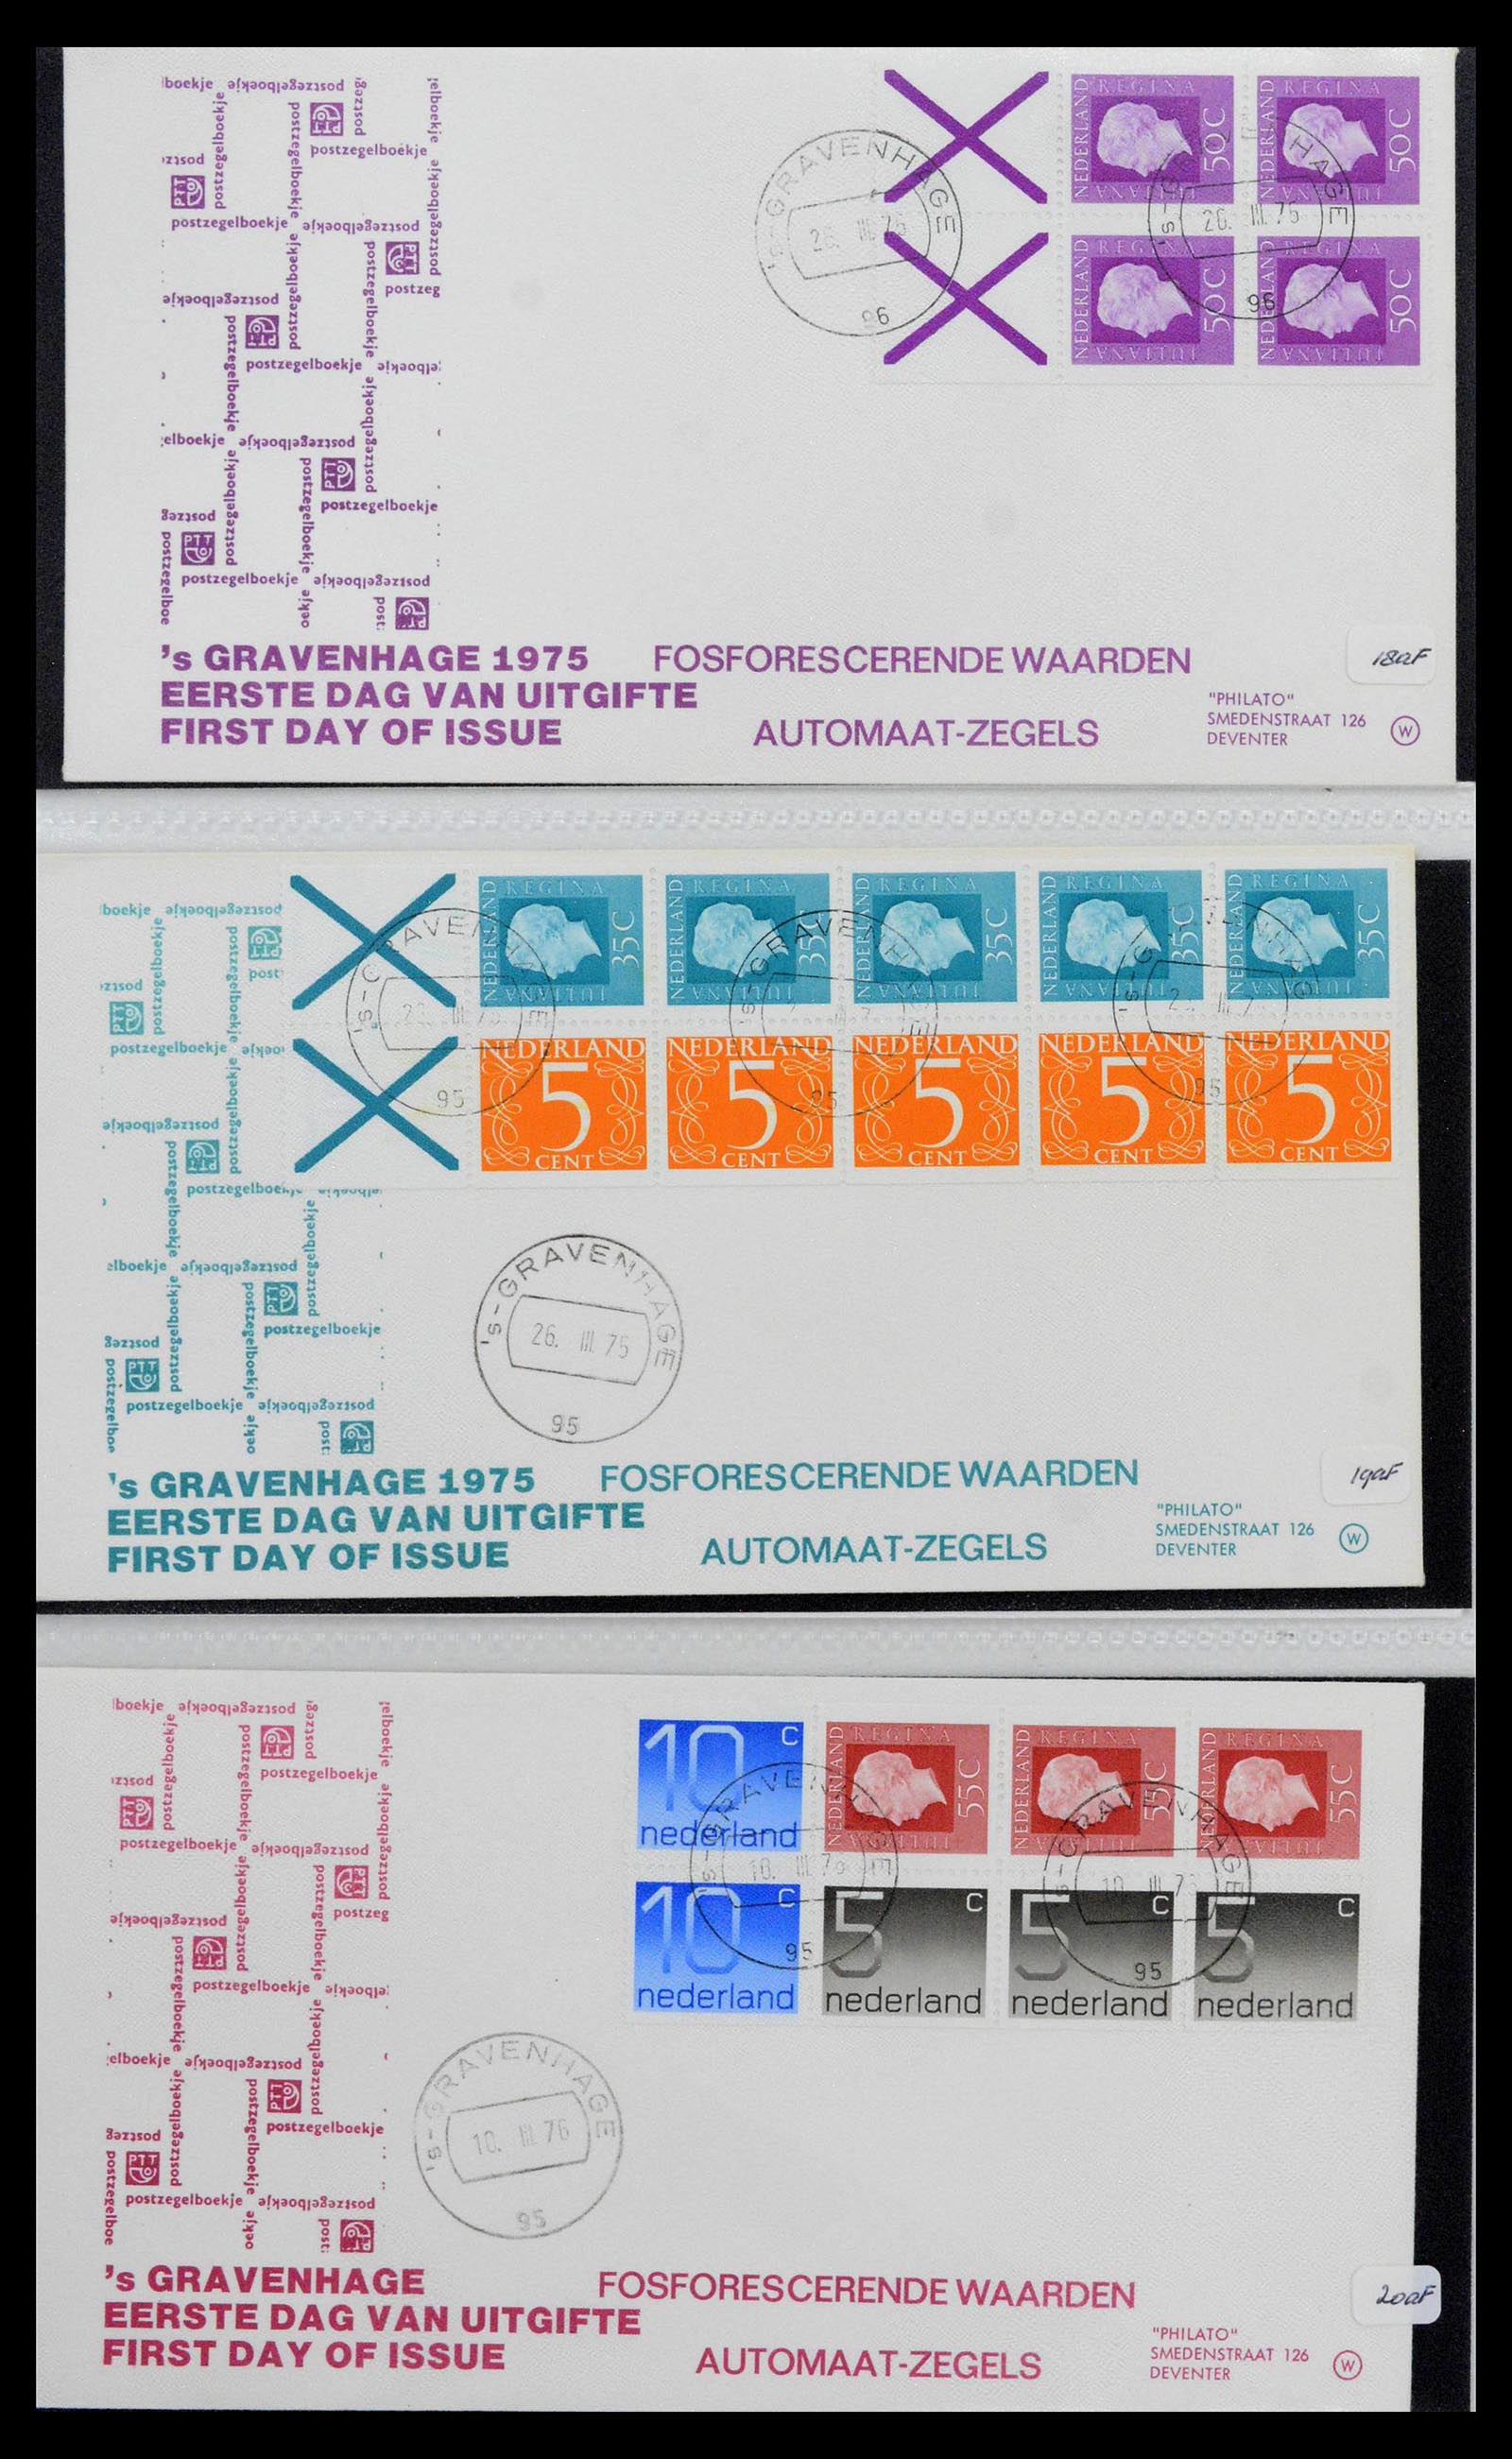 38559 0089 - Stamp collection 38559 Netherlands special first day covers.